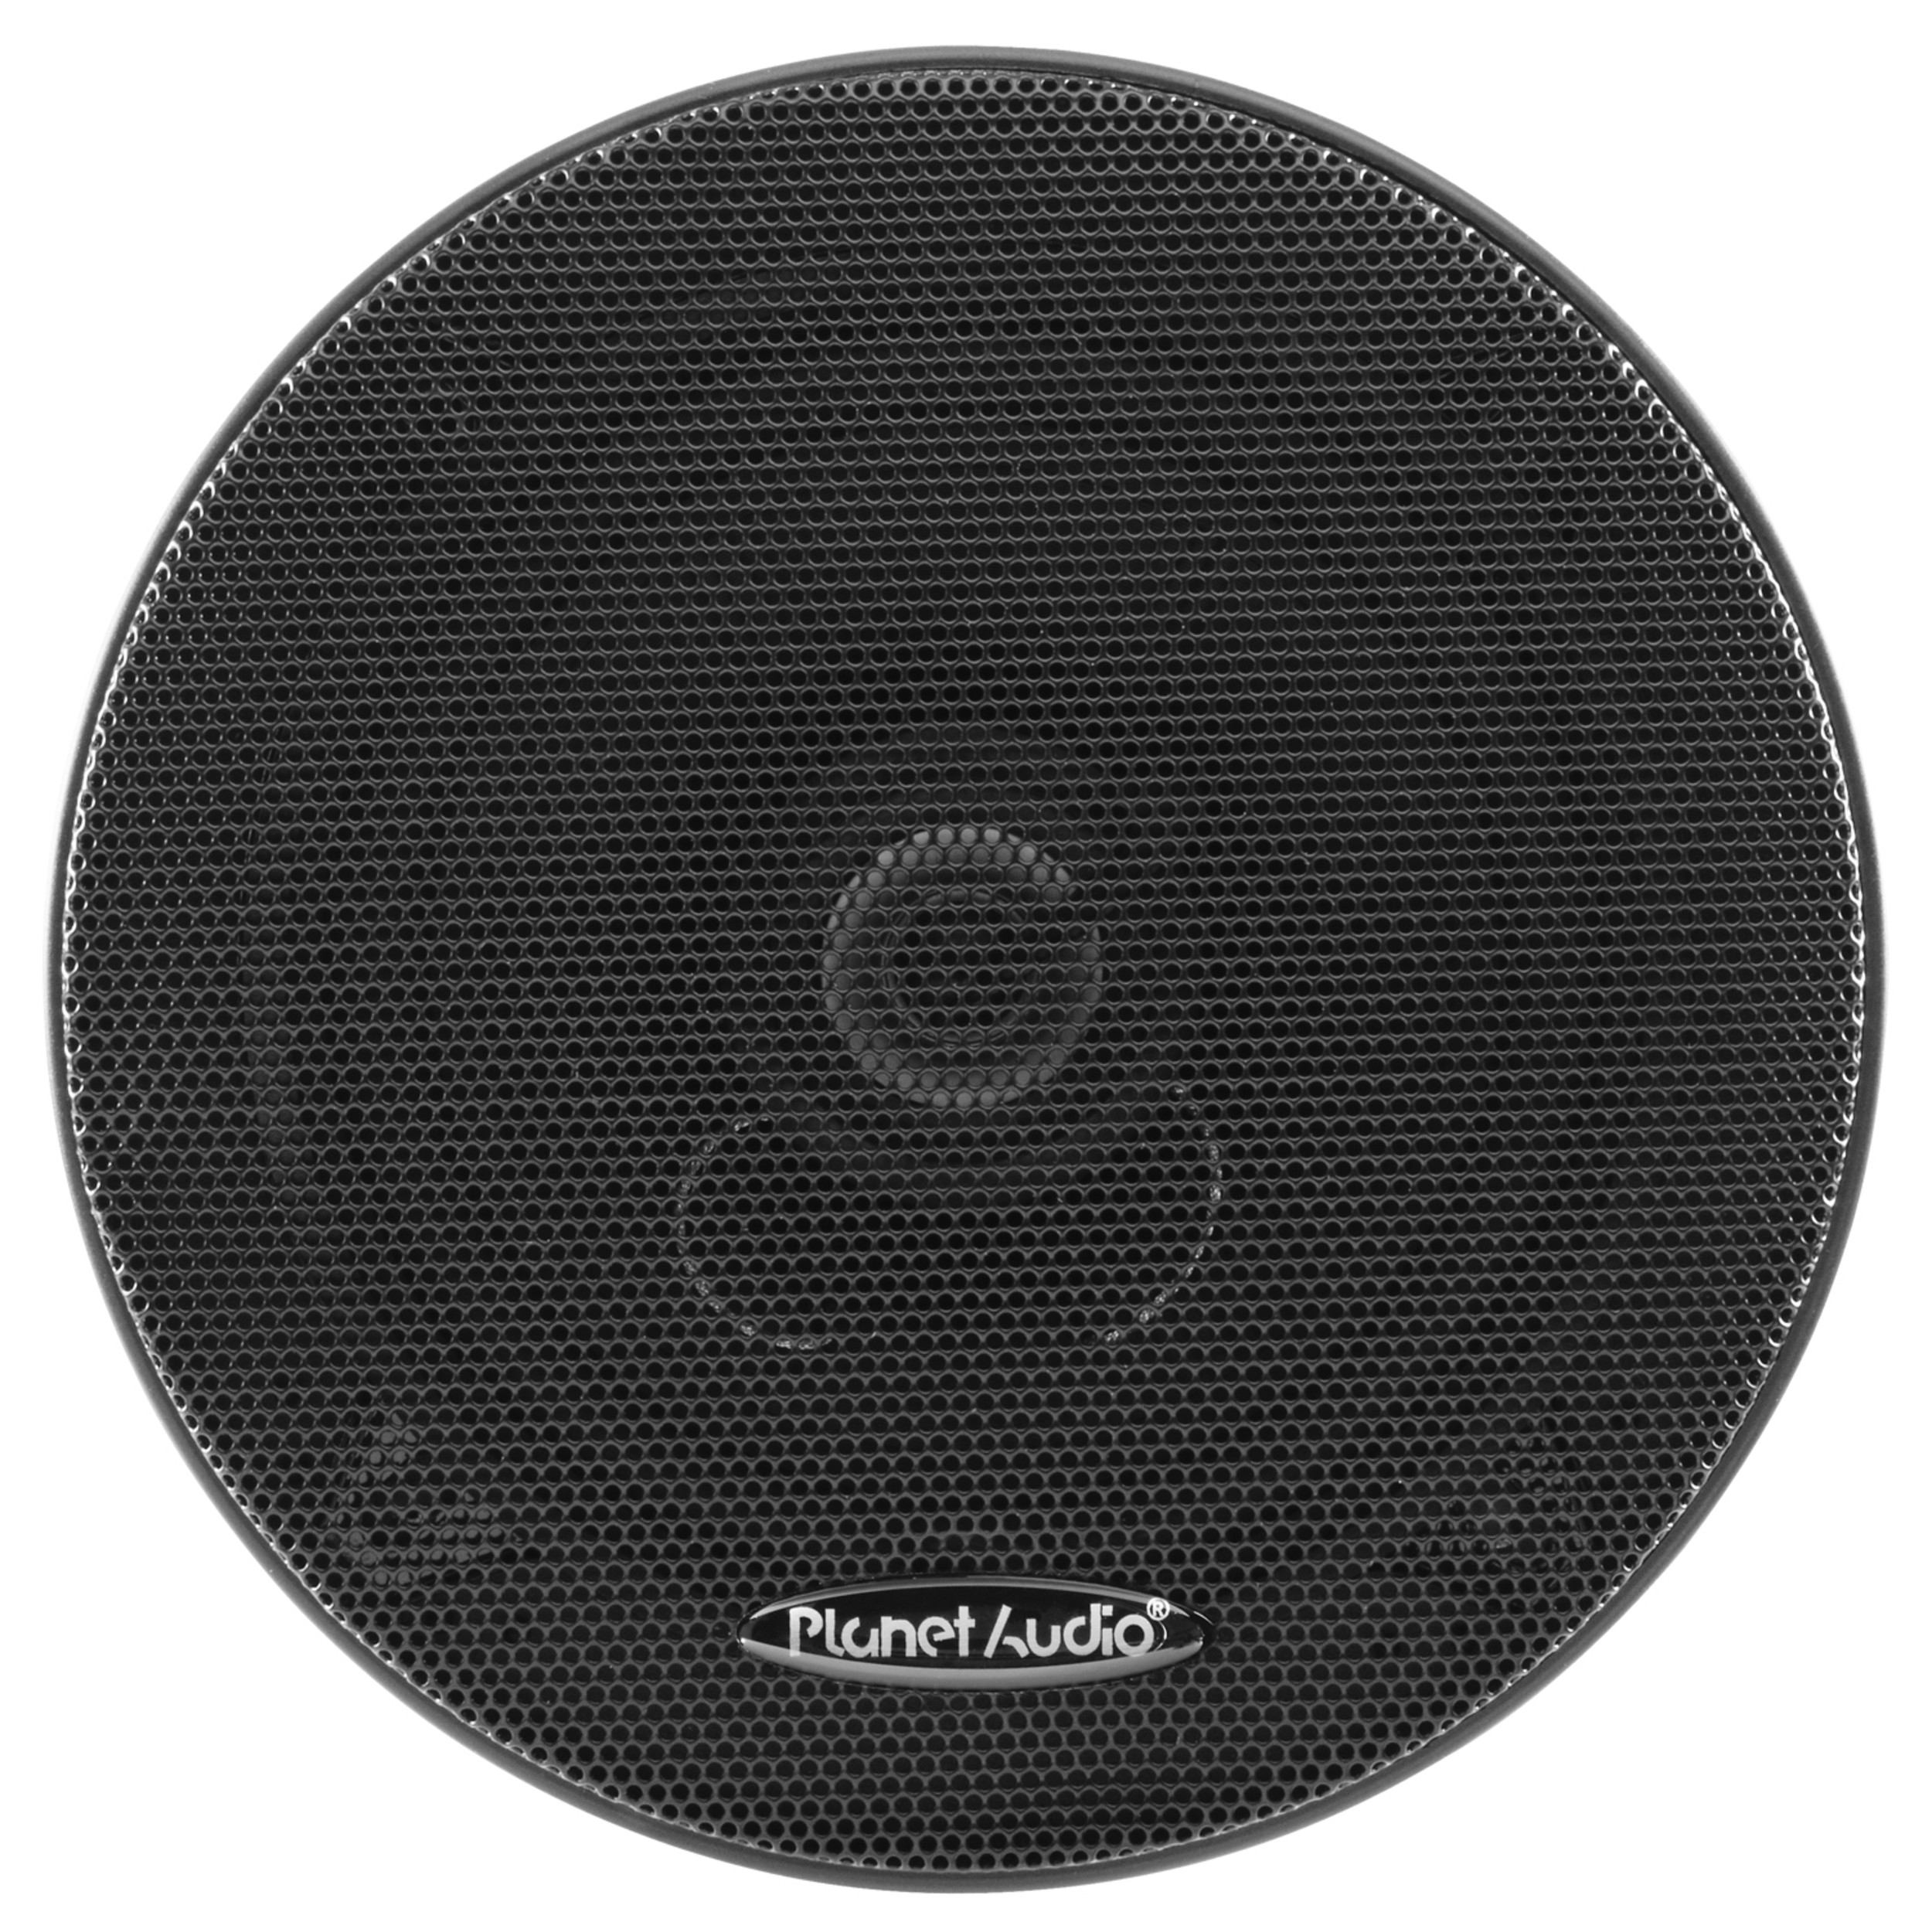 Planet Audio TRQ522 Torque Series 5.25 Inch Car Audio Door Speakers - 225 Watts Max, 2 Way, Full Range, Coaxial, Sold in Pairs, Hook Up To Stereo and Amplifier, Tweeters - image 3 of 9